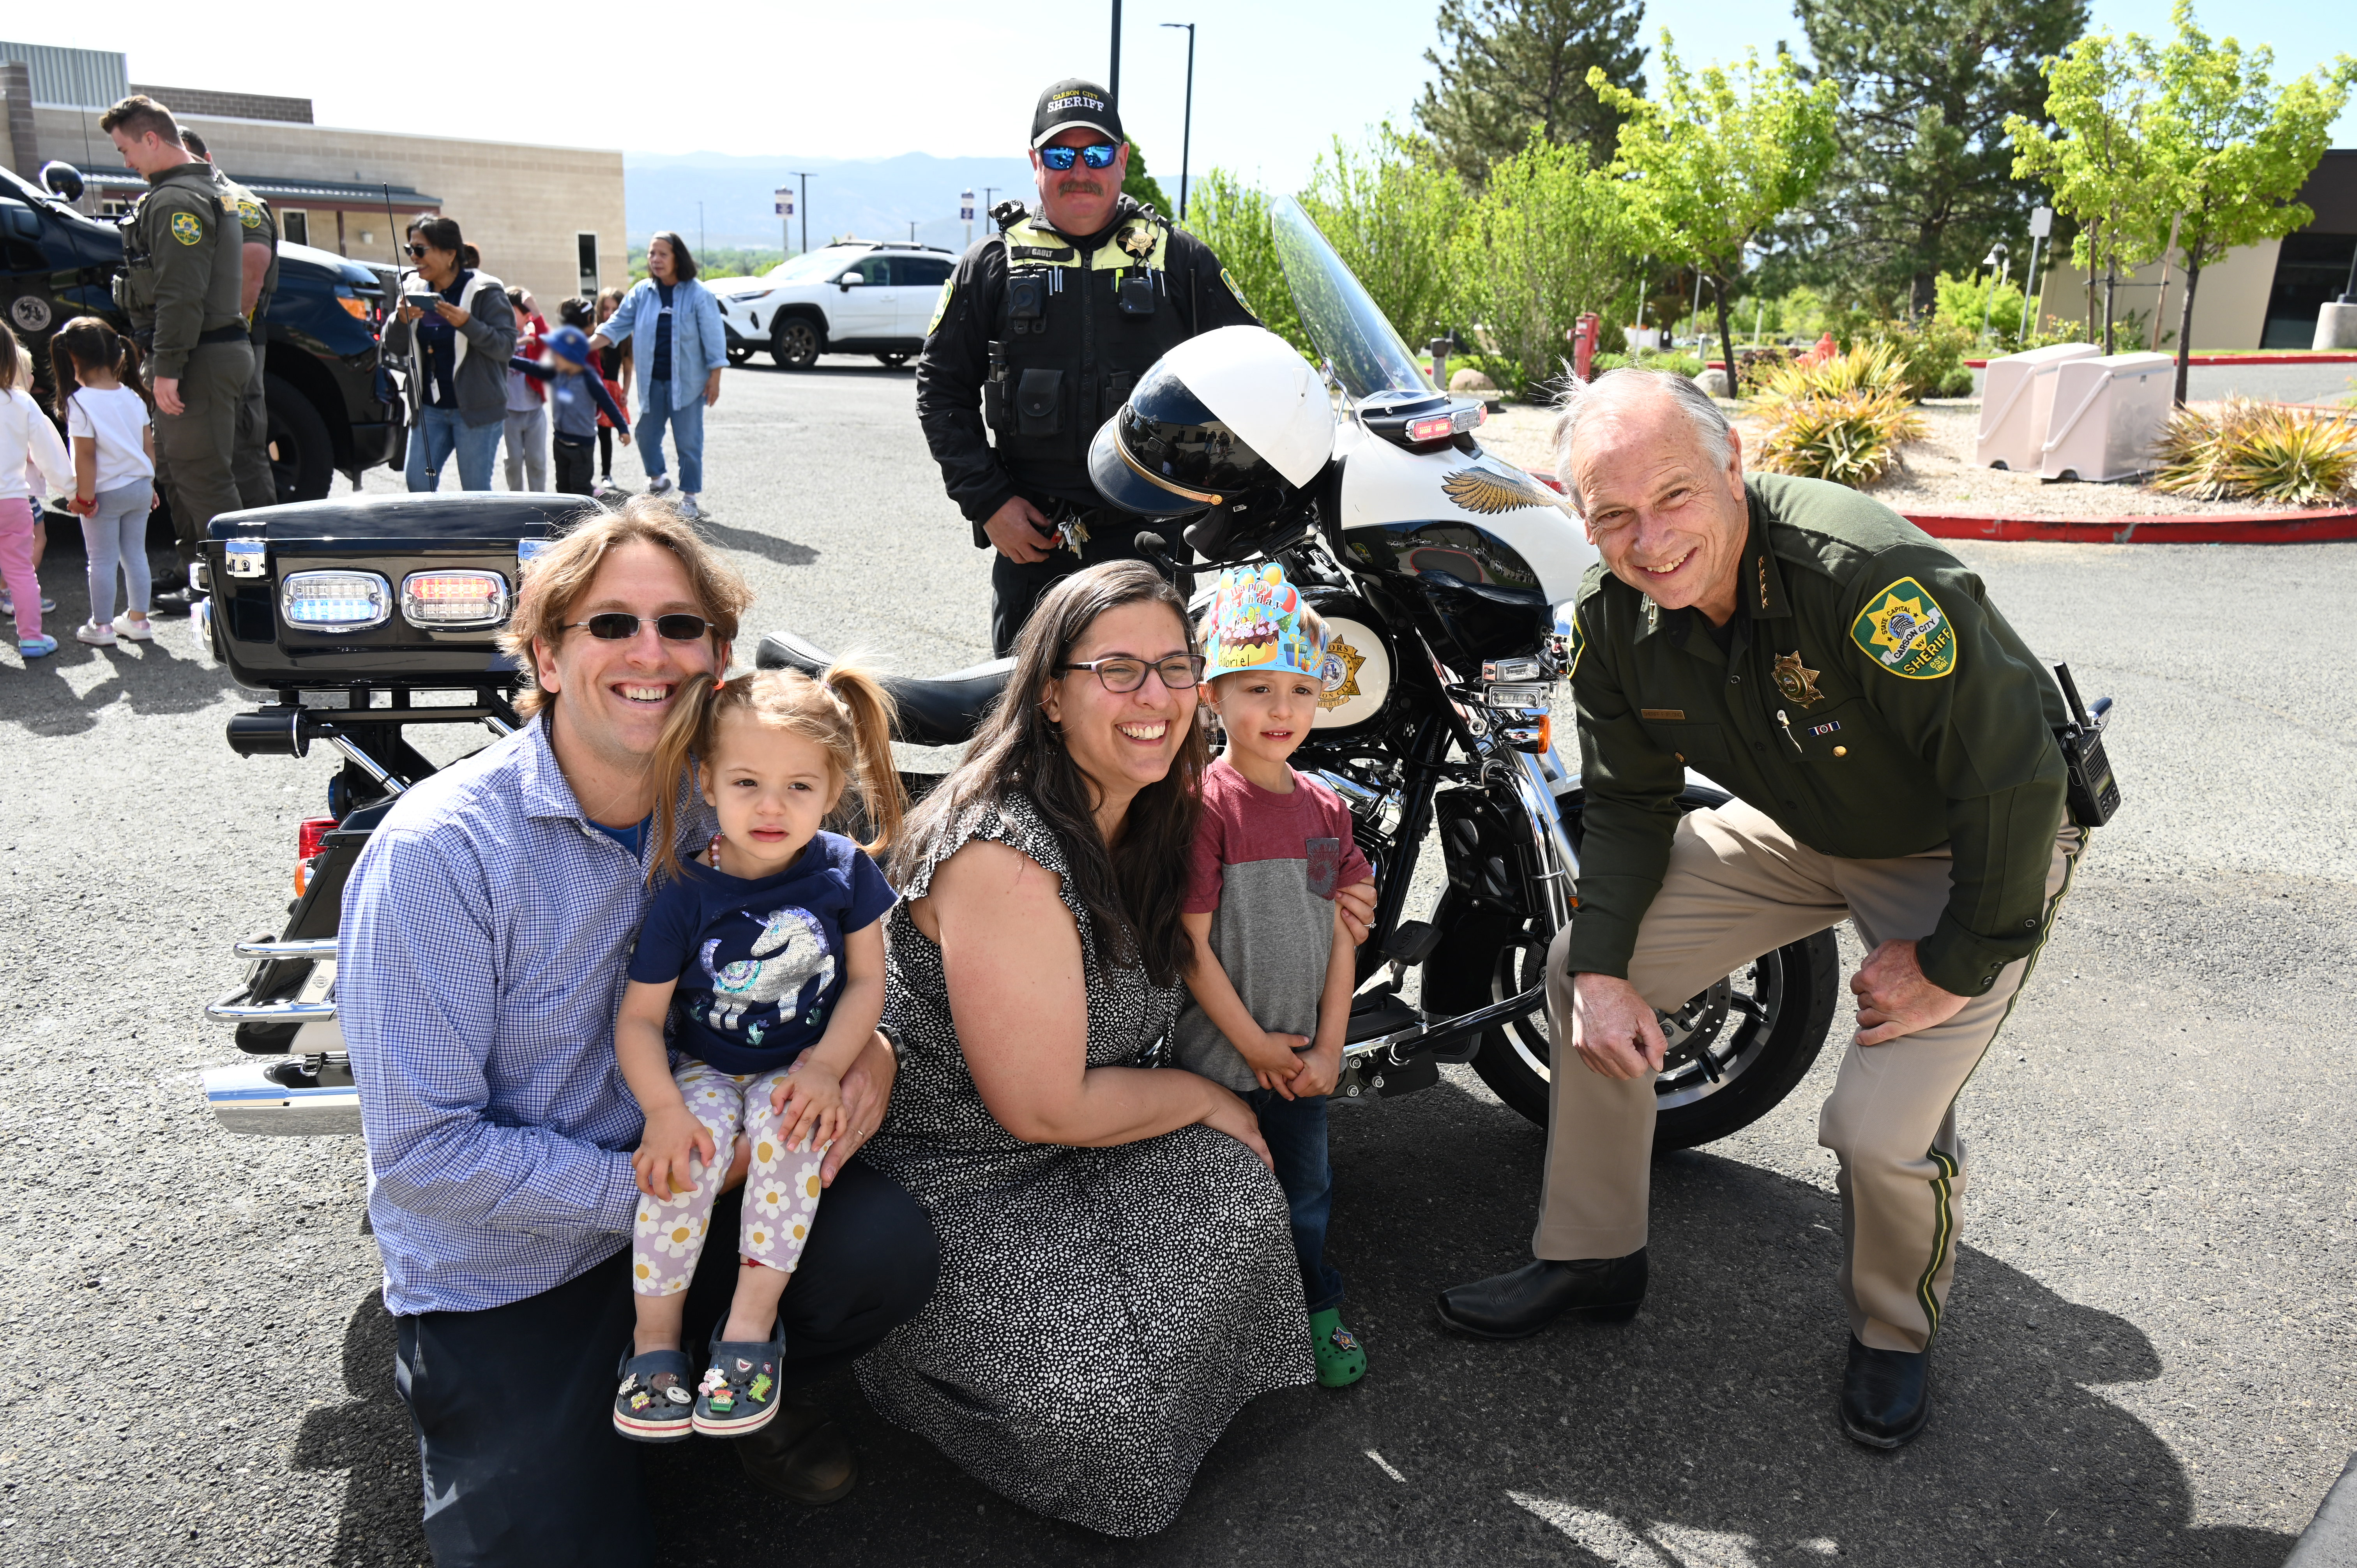 Singer Family with Carson City Sheriff Ken Furlong and deputies